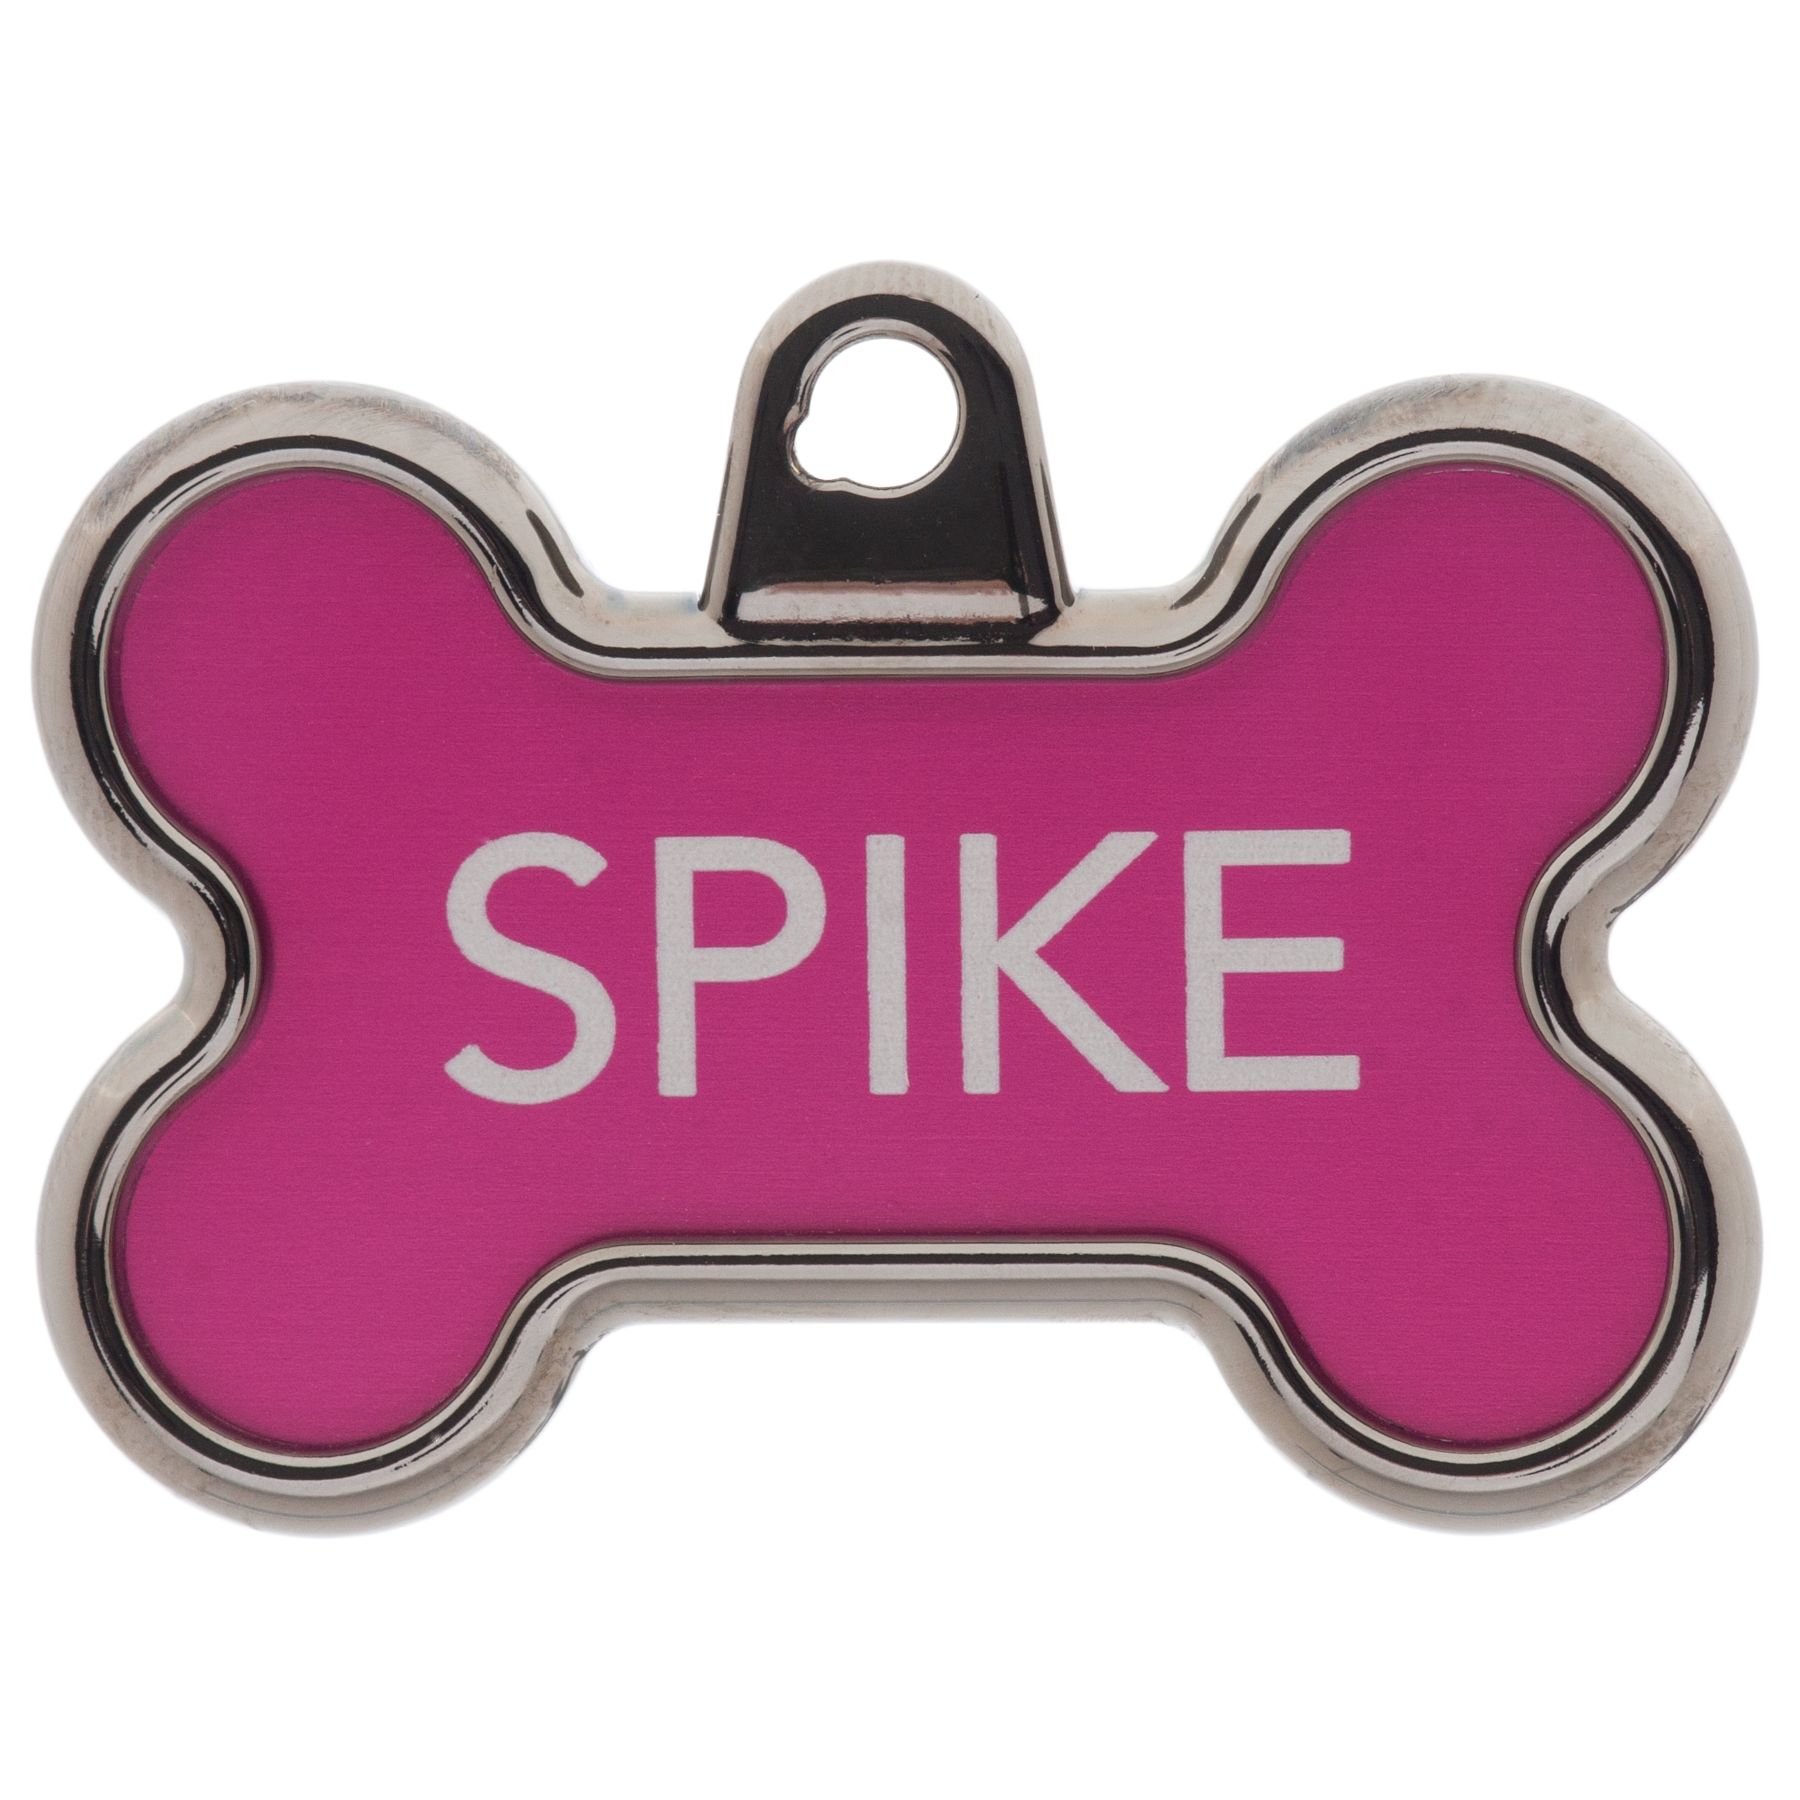 TagWorks Elegance Collection Chrome Bone Personalized Pet ID Tag in Pink, Size: Large | PetSmart